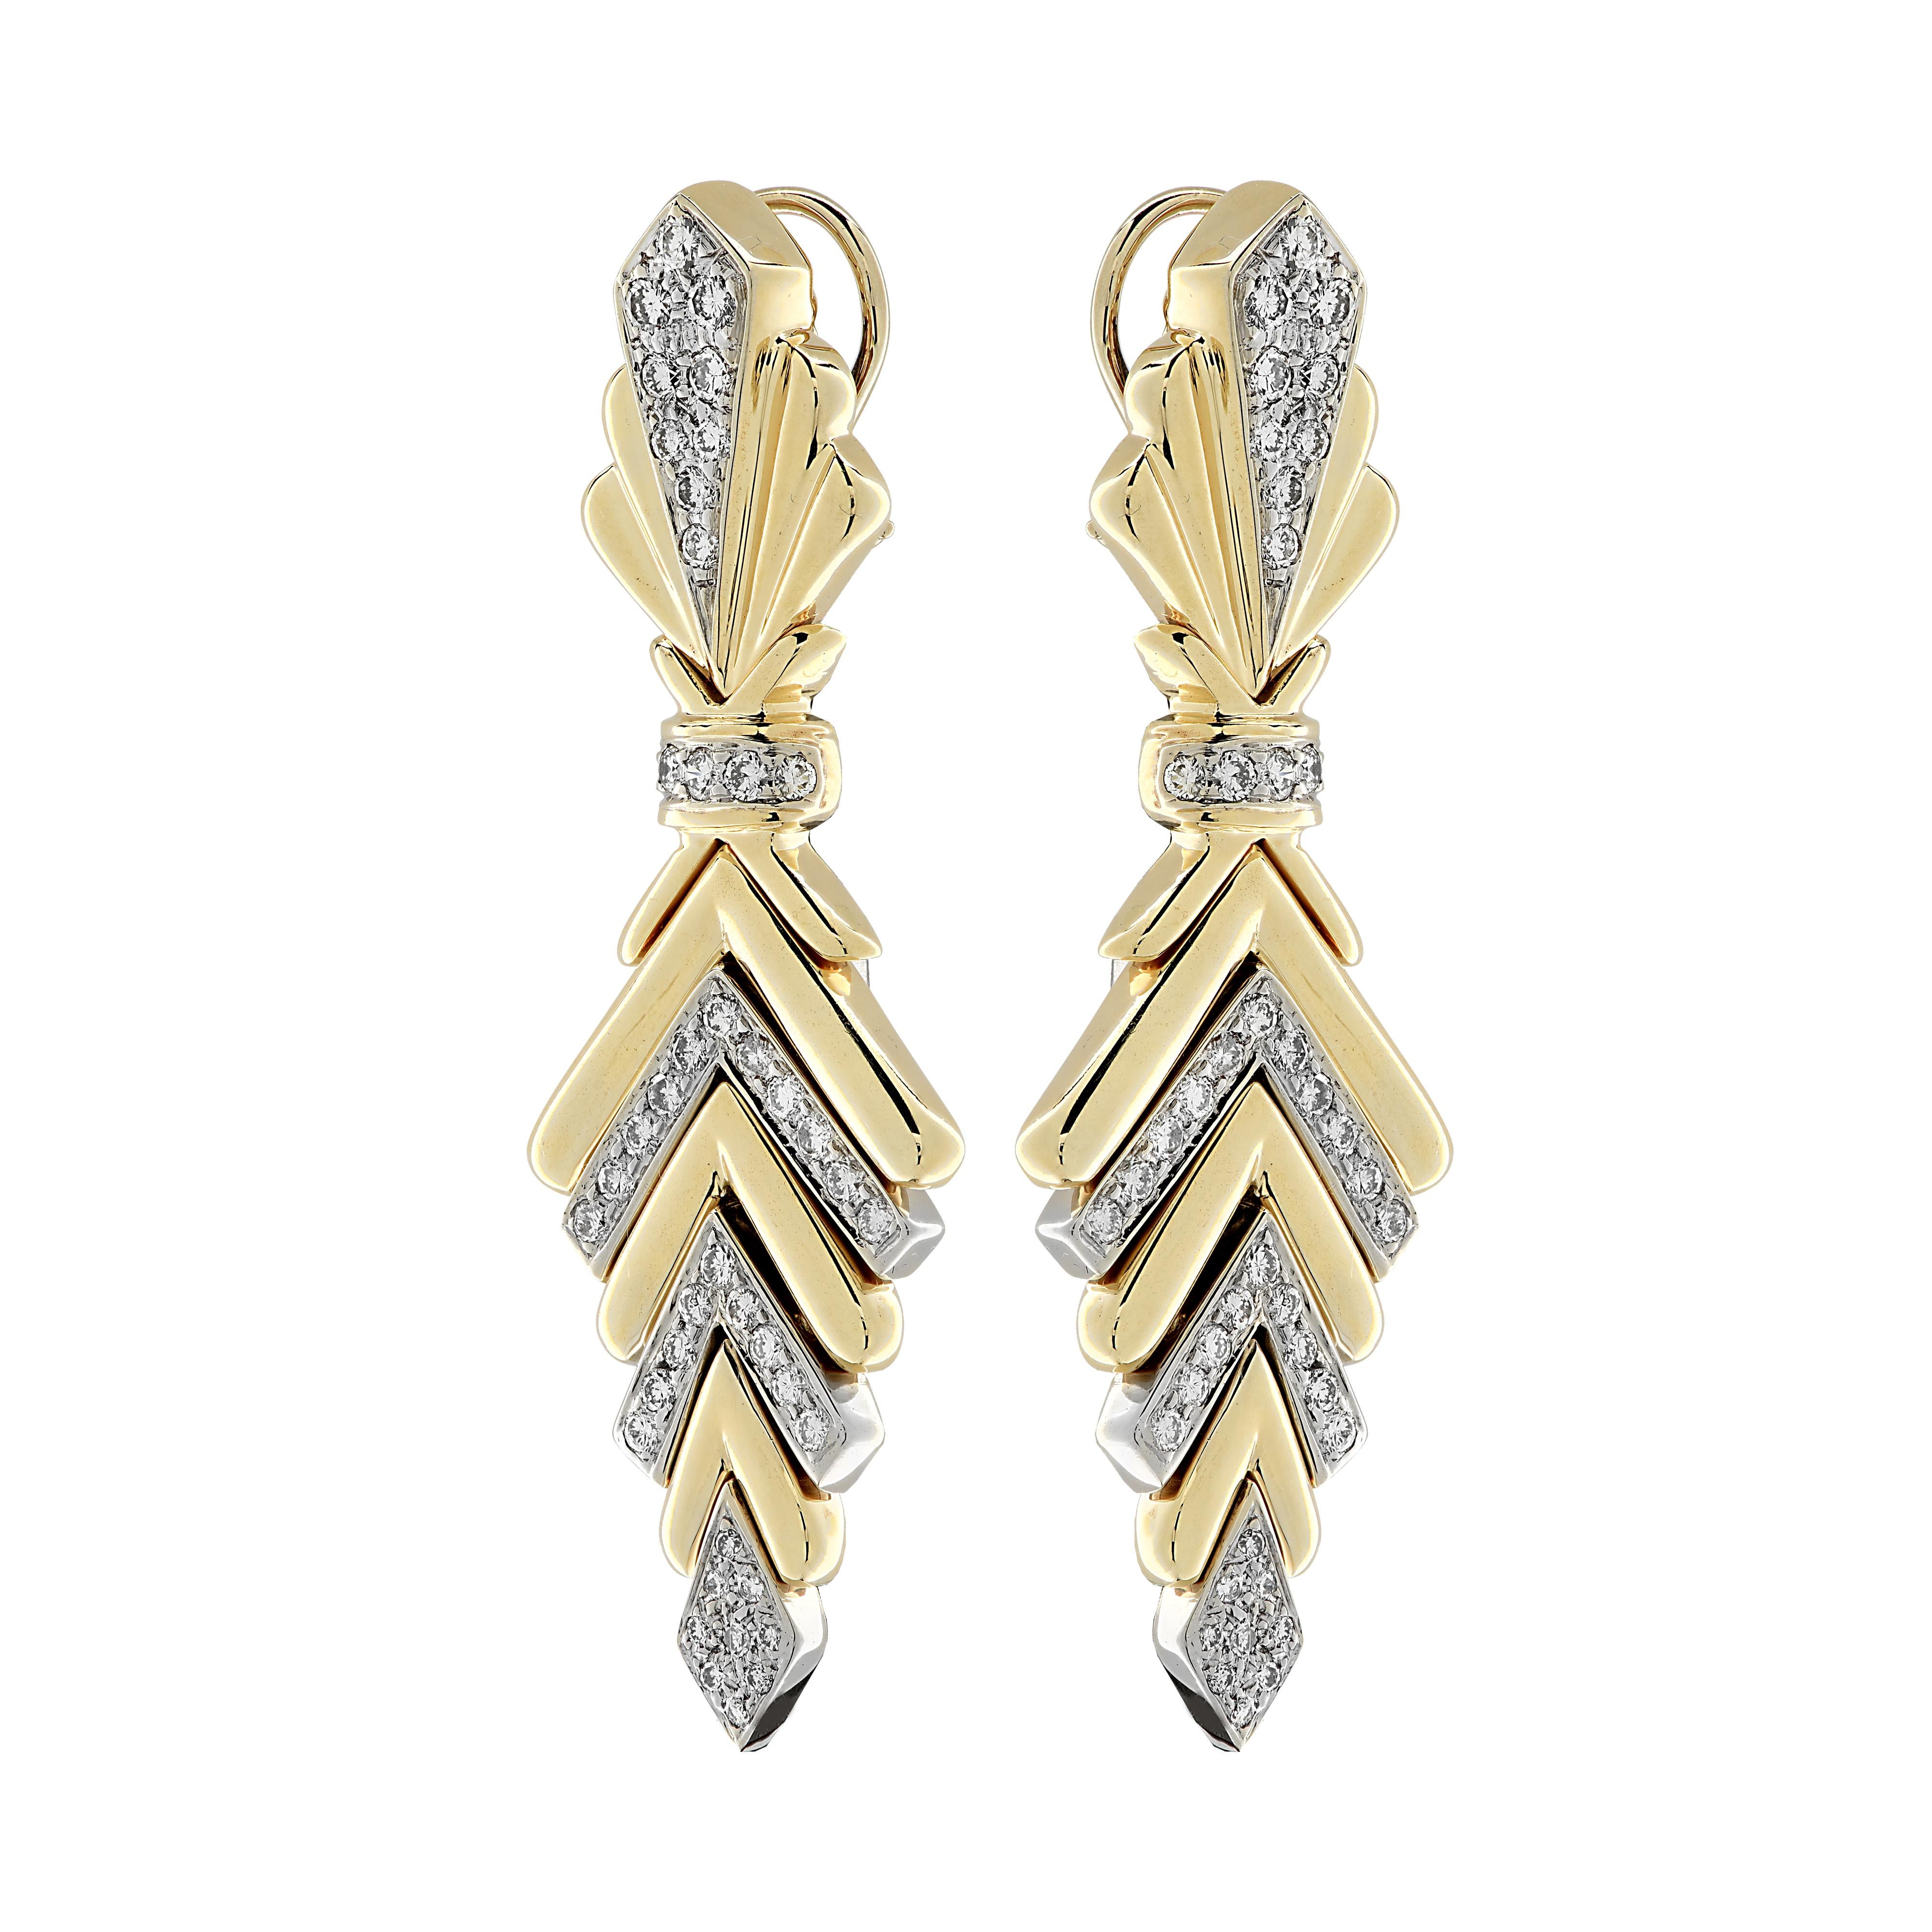 Striking clip-on dangle earrings crafted in yellow and white gold, featuring 90 round brilliant cut diamonds weighing approximately 3 carats total, F-G color, VS clarity. These stunning earrings measure 2.65 inches in length and .86 inches at its